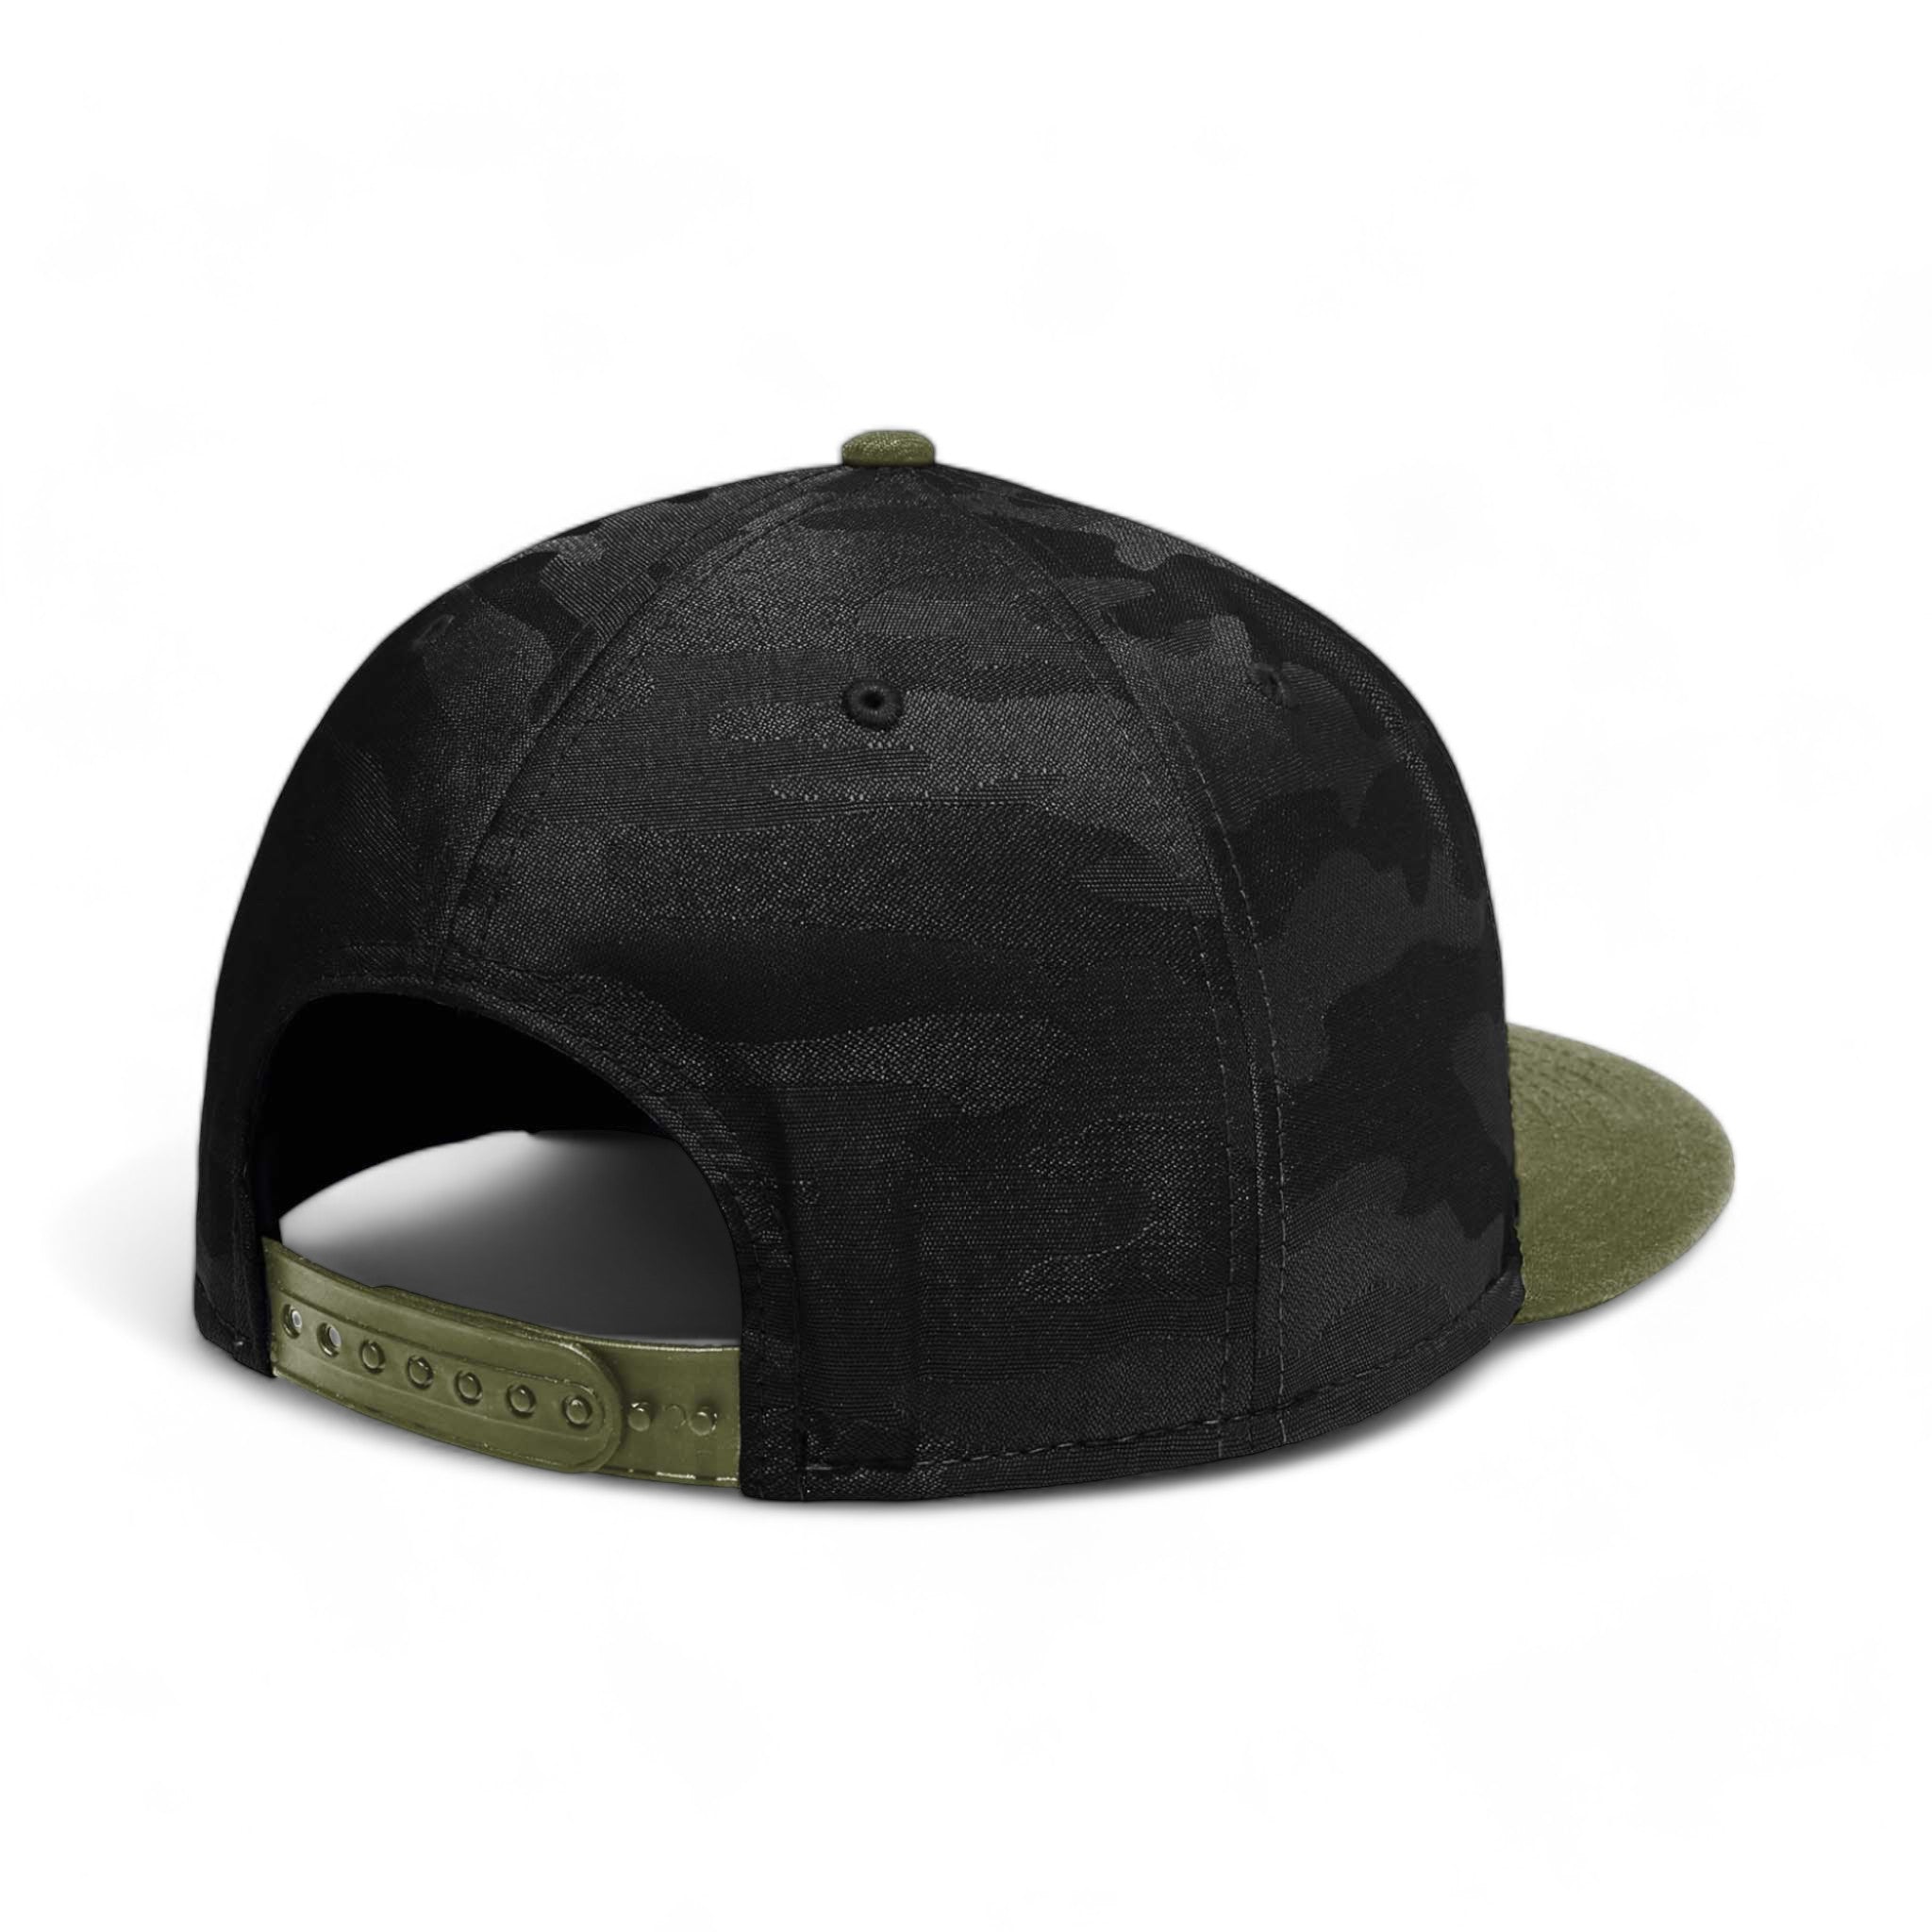 Back view of New Era NE407 custom hat in army and black camo